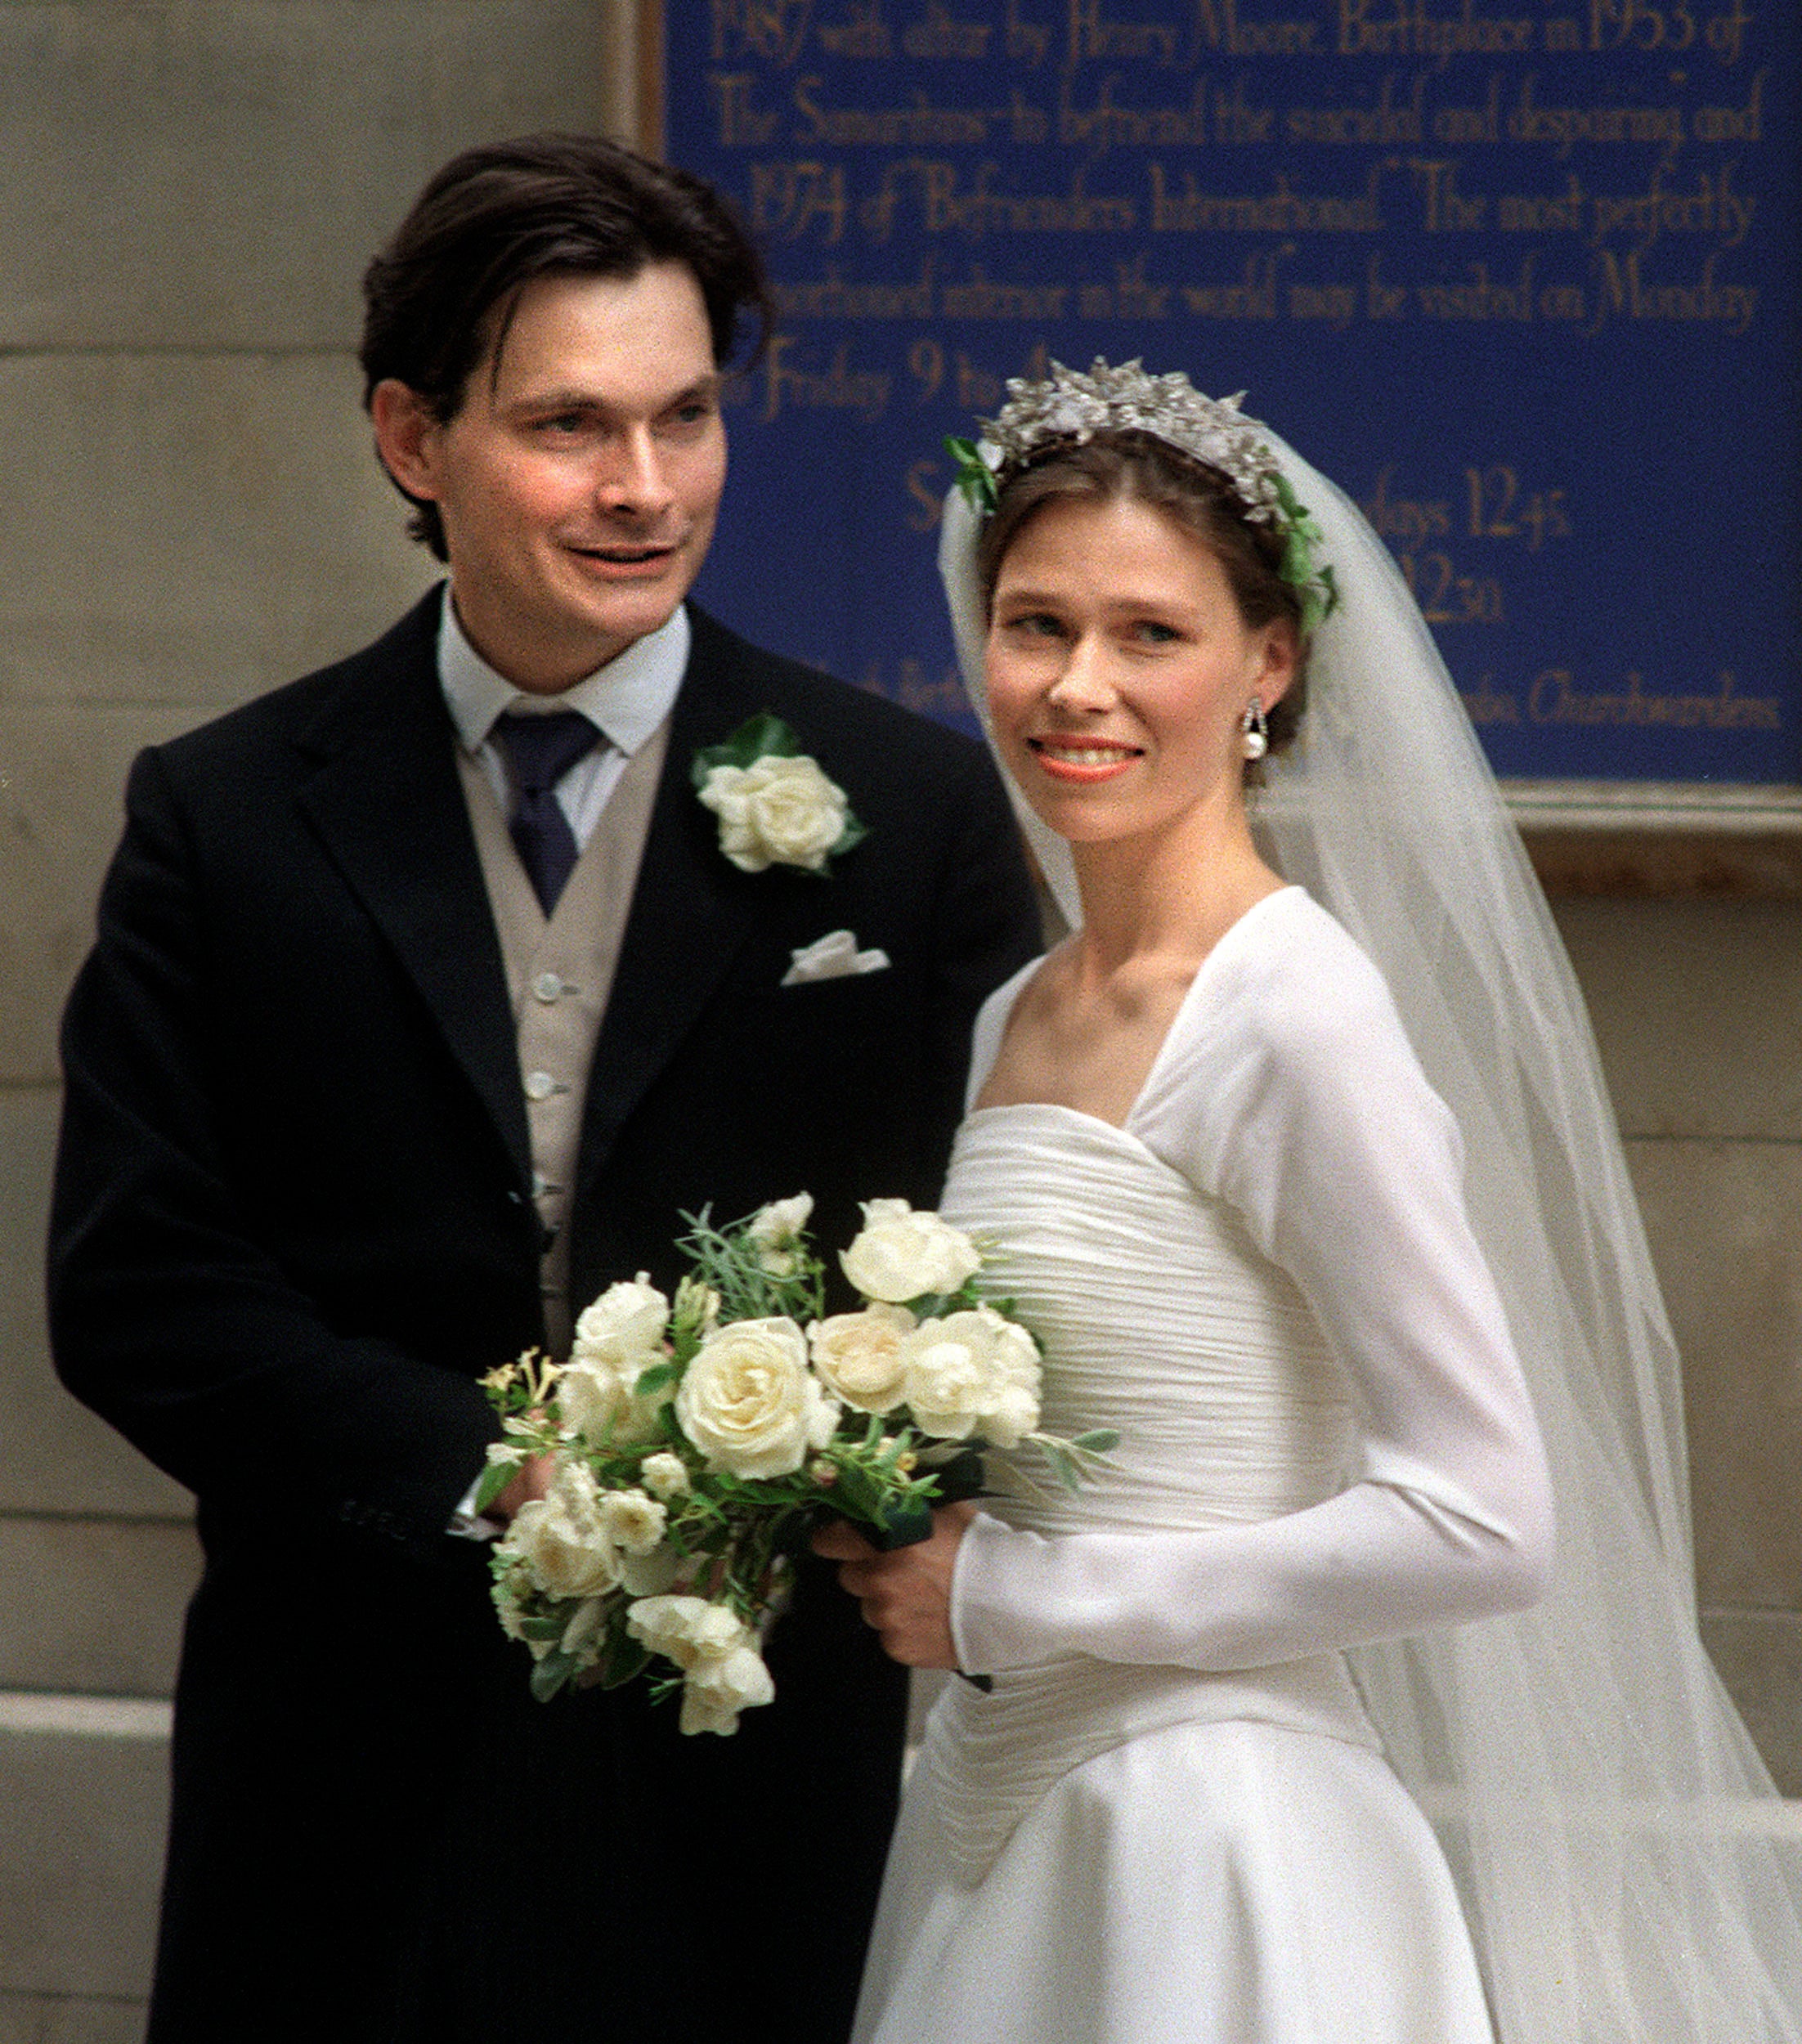 Lady Sarah Chatto during her marriage to Daniel Chatto in 1994